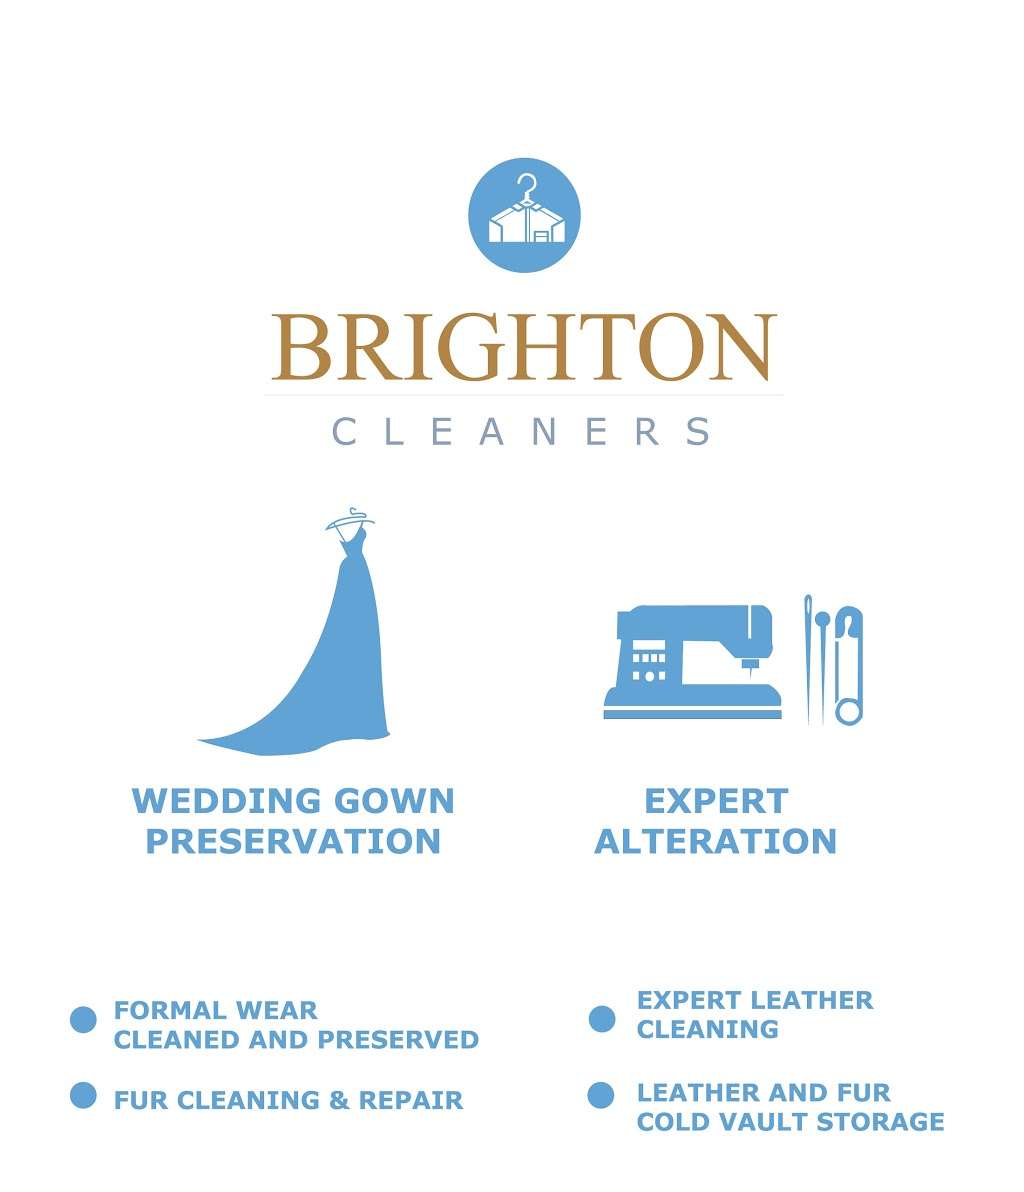 Brighton Cleaners | 25 Glenville St, Greenwich, CT 06831 | Phone: (203) 531-5679